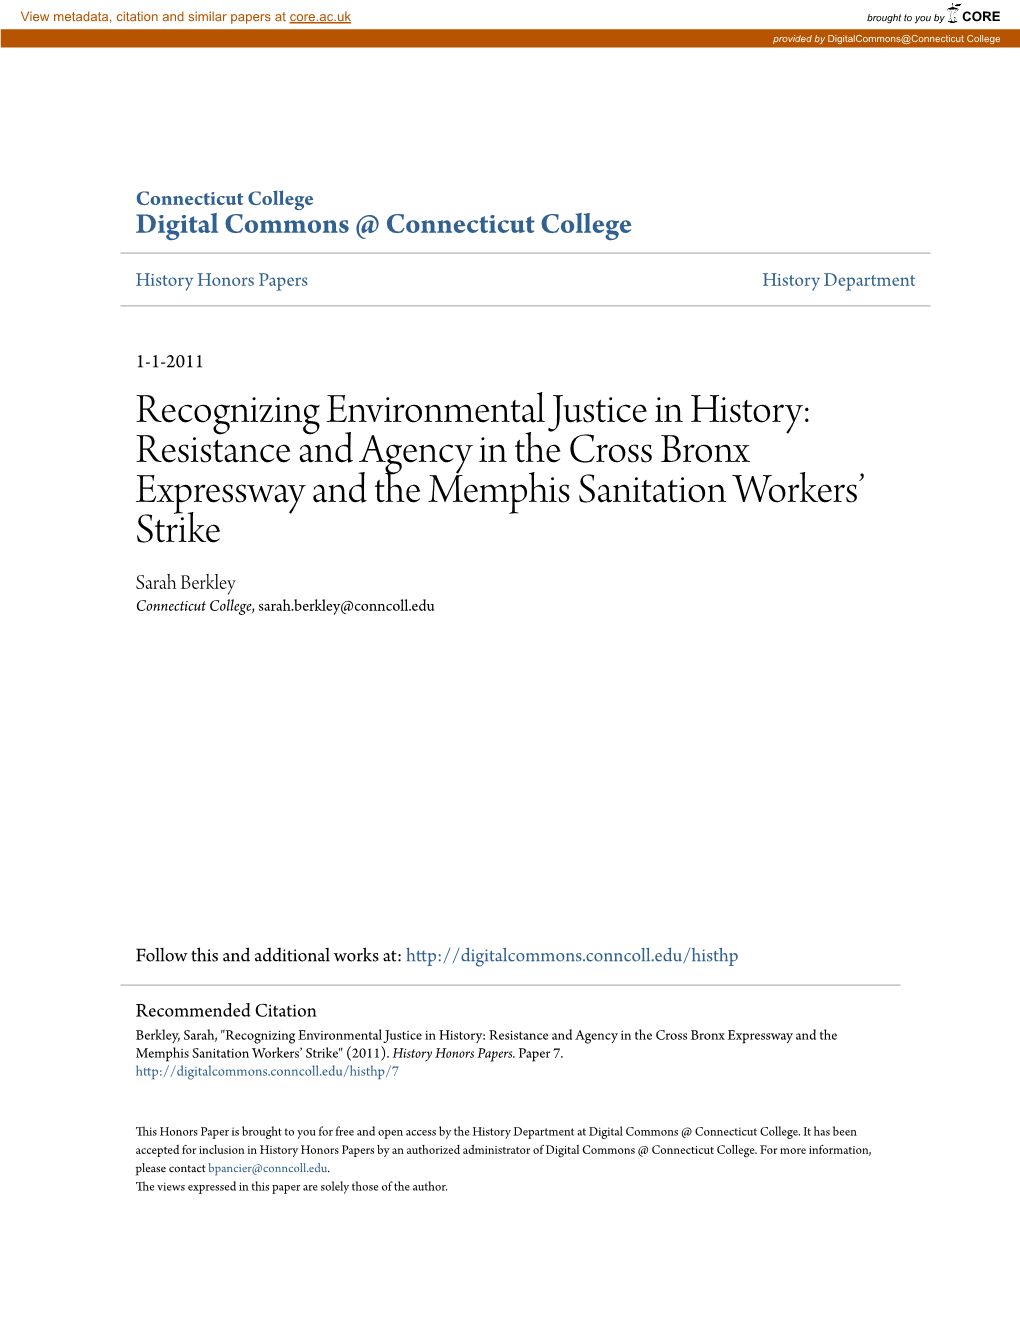 Recognizing Environmental Justice in History: Resistance and Agency In